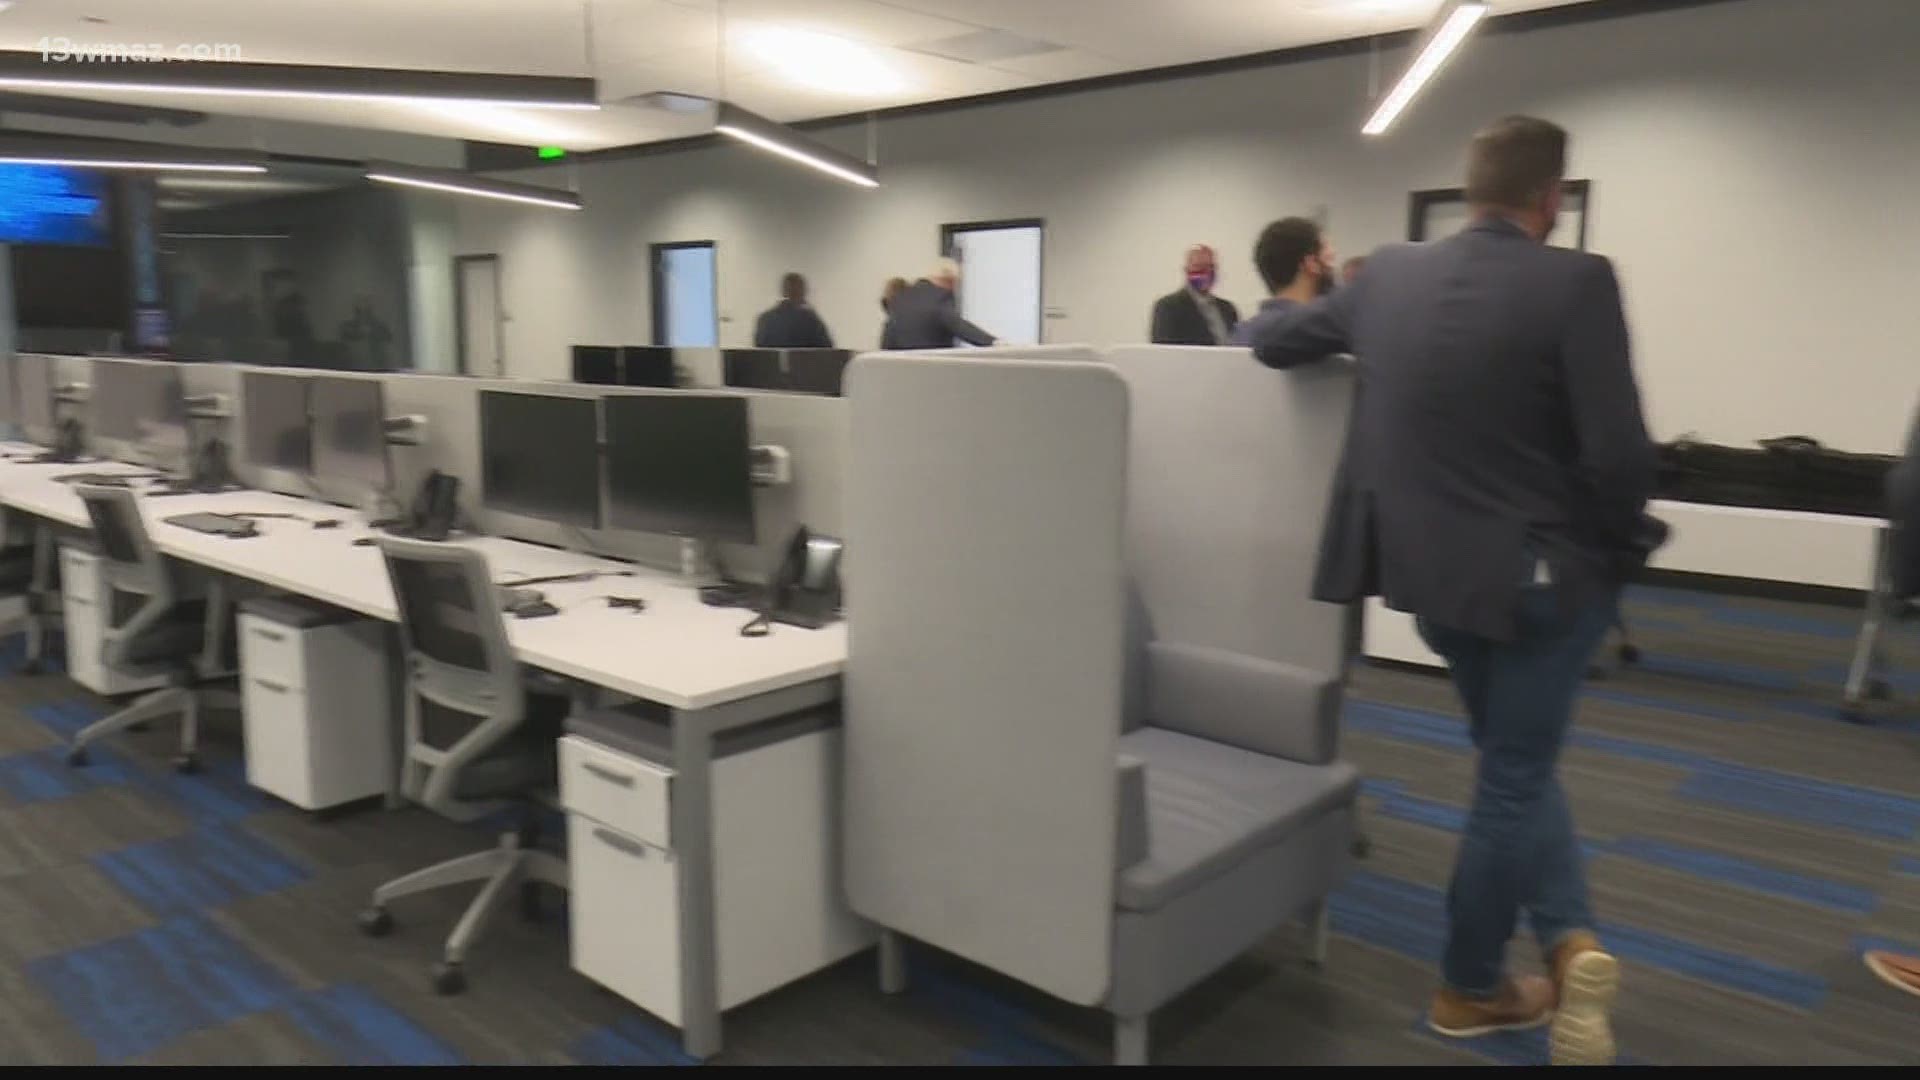 Warner Robins is continuing to be a boomtown.
Monday, state, city, and base leaders came together to cut the ribbon for a new software facility.